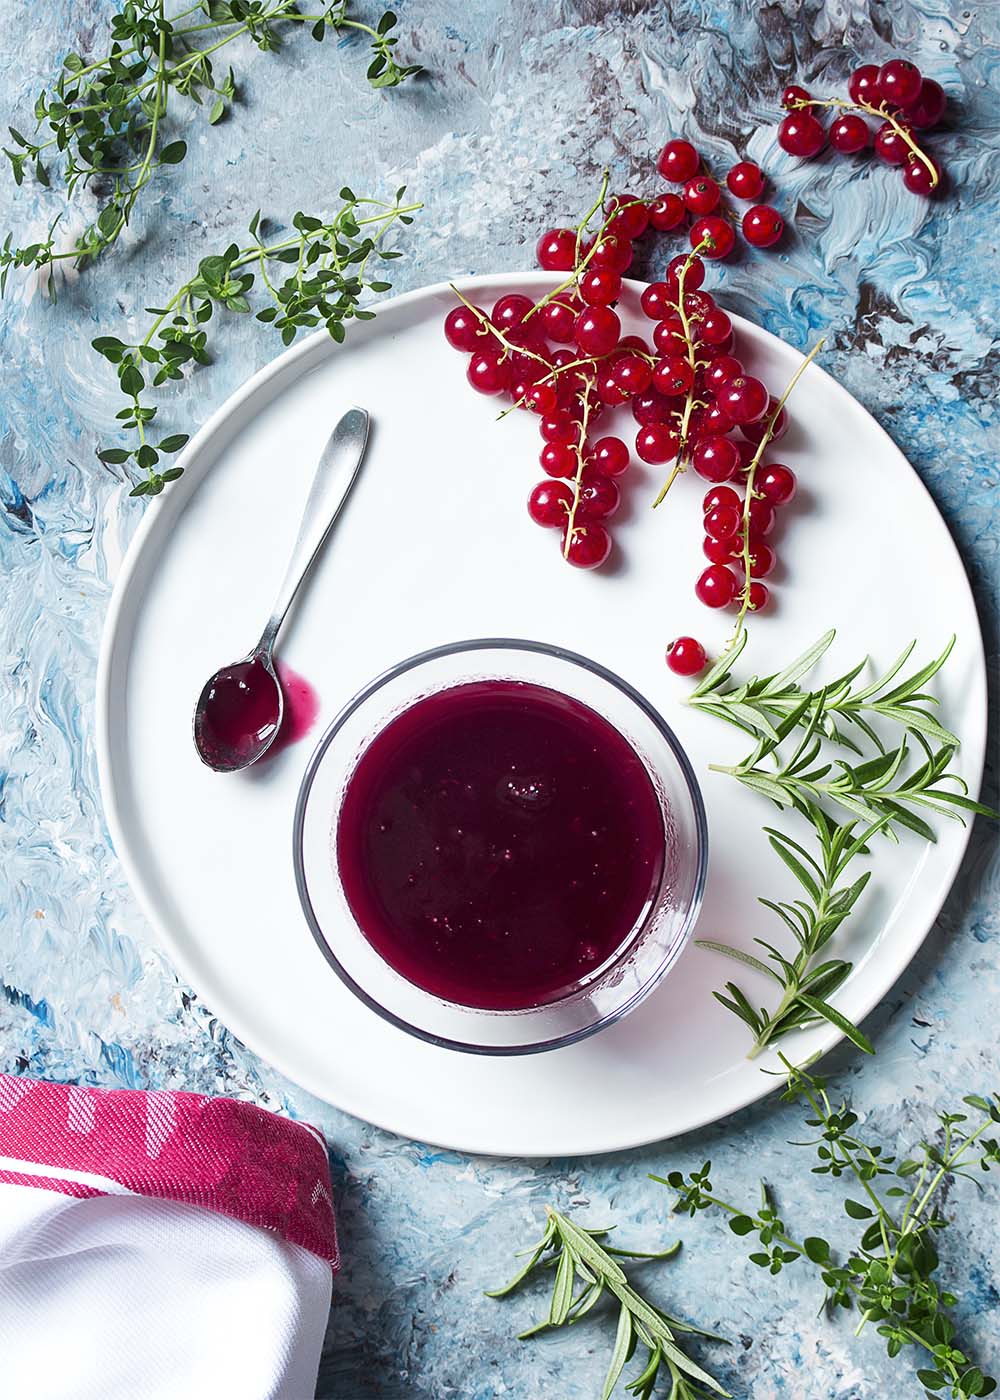 Top view of a cup of red currant sauce on a white plate with a spoon.